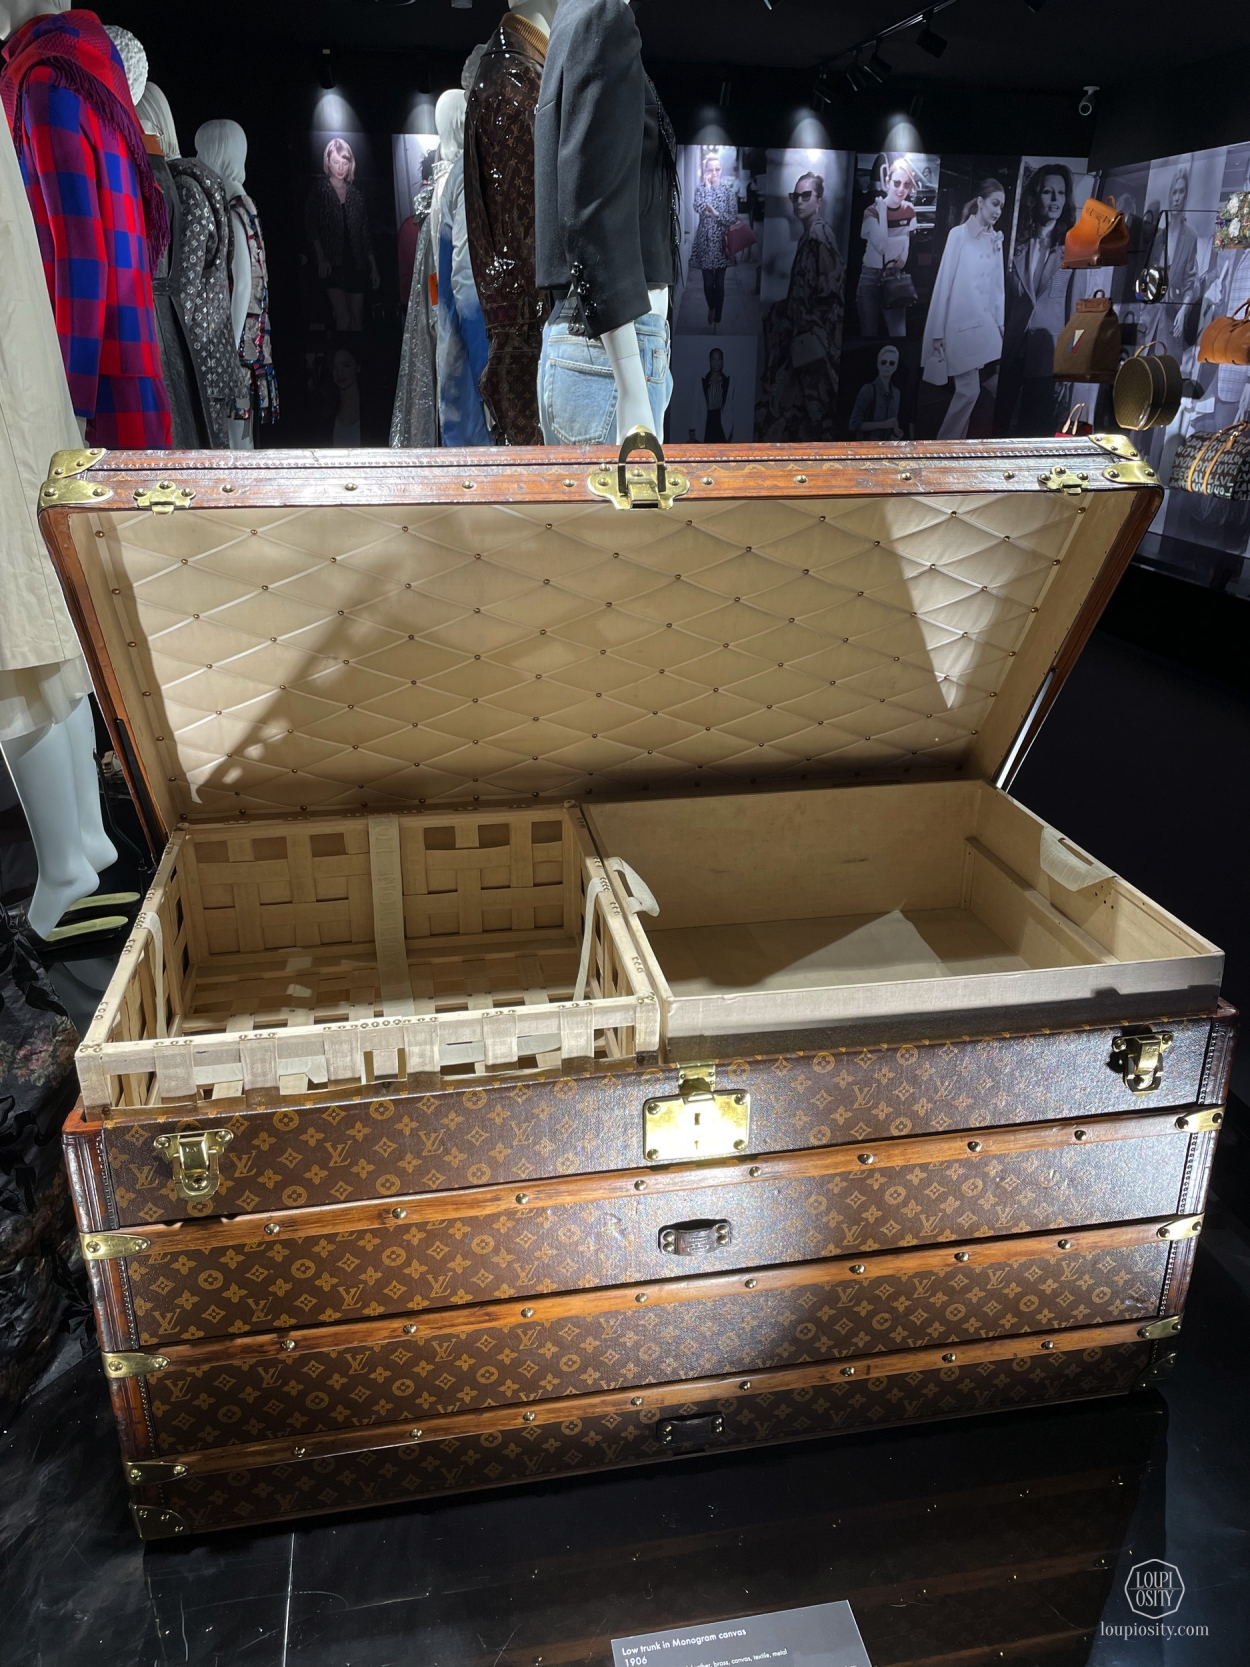 Louis Vuitton's SEE LV exhibition just landed in Dubai